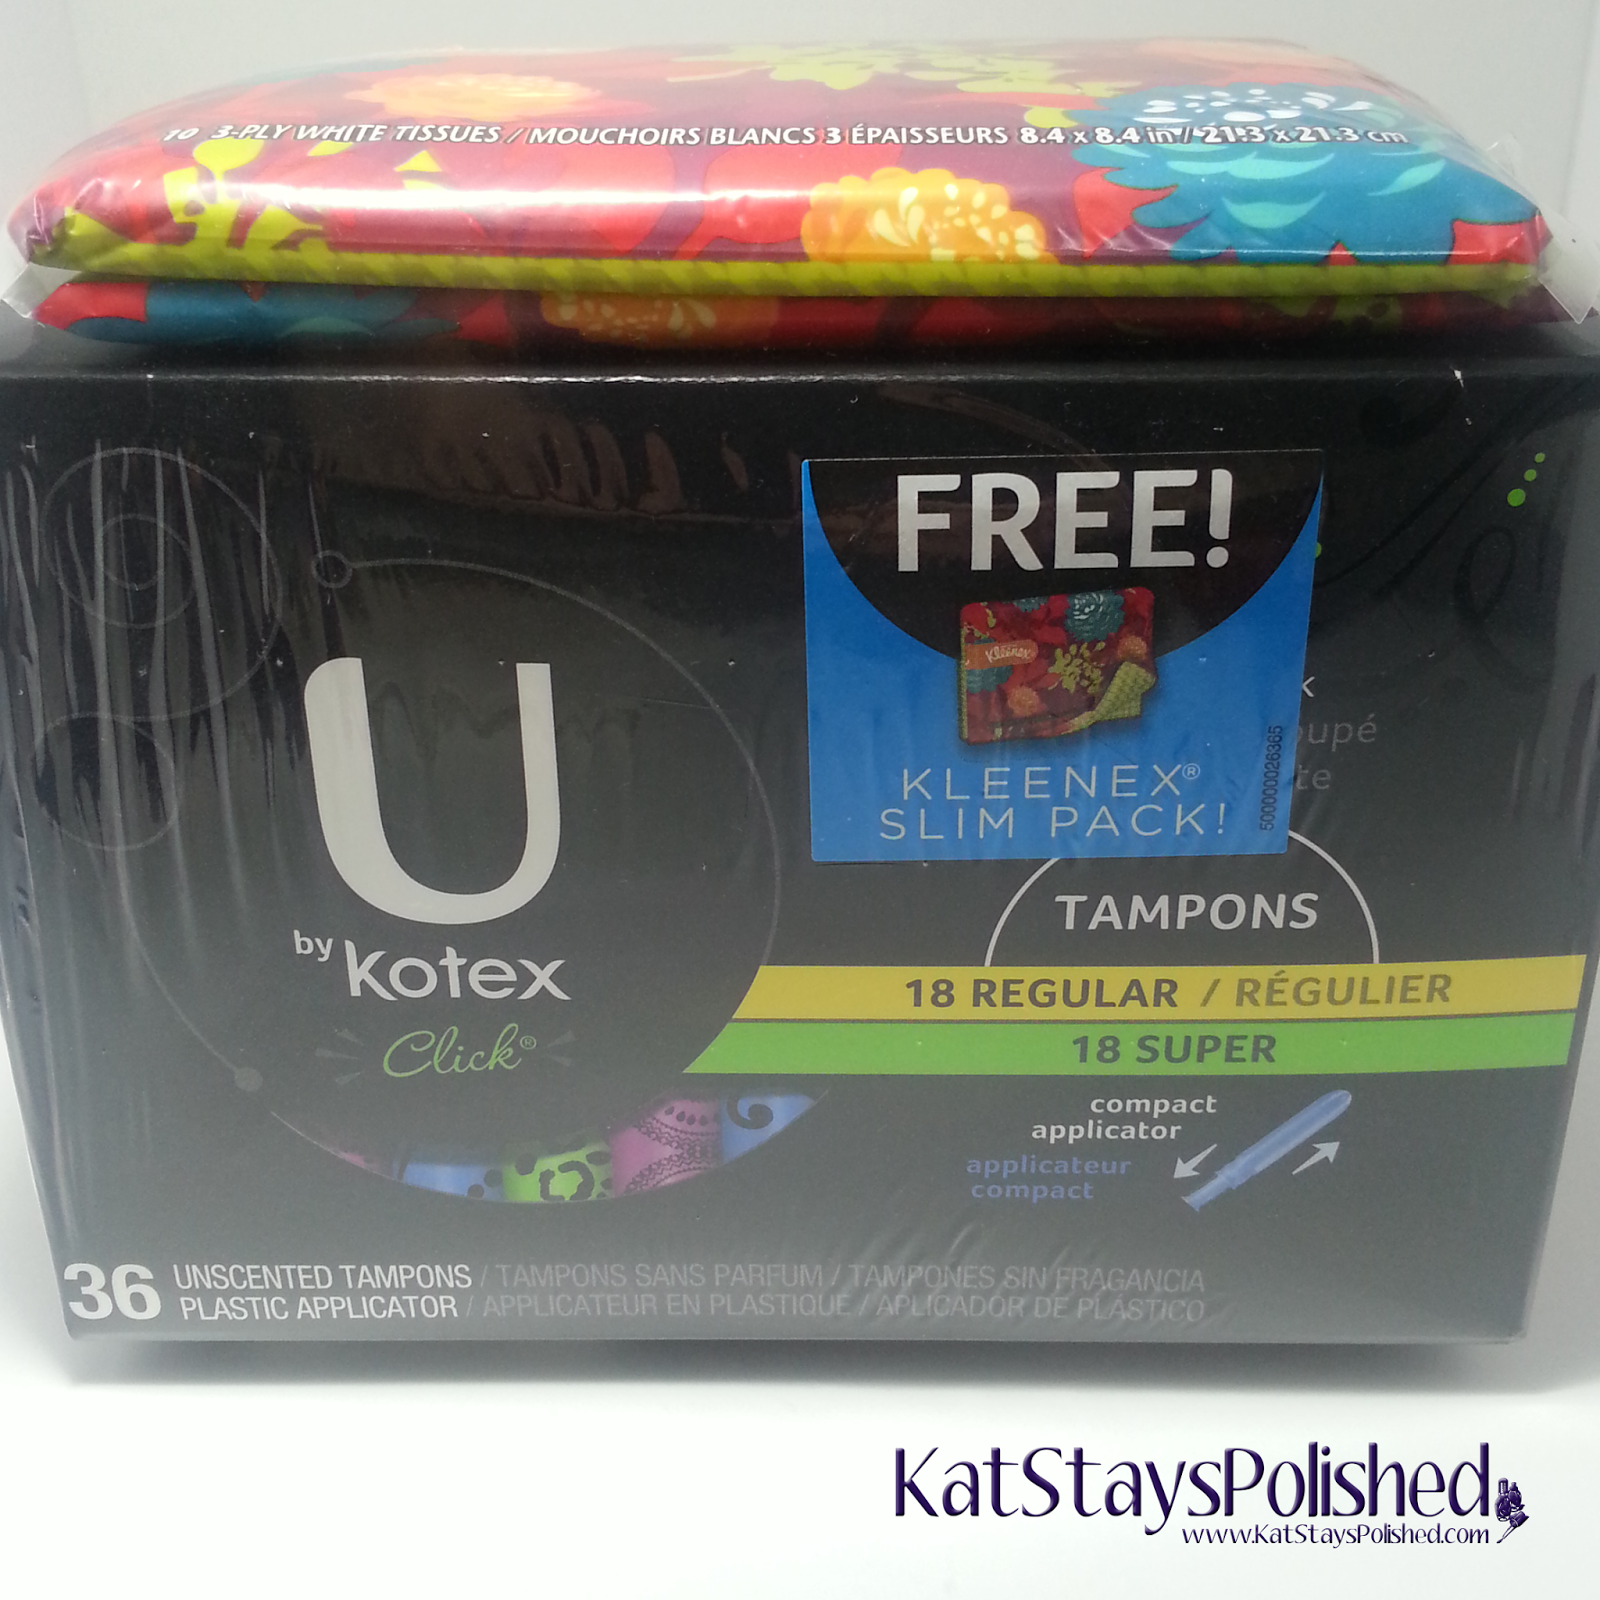 5 Must-Have Fall Essentials for Your Handbag - U by Kotex Click Tampons with Kleenex Sample at Walmart | Kat Stays Polished